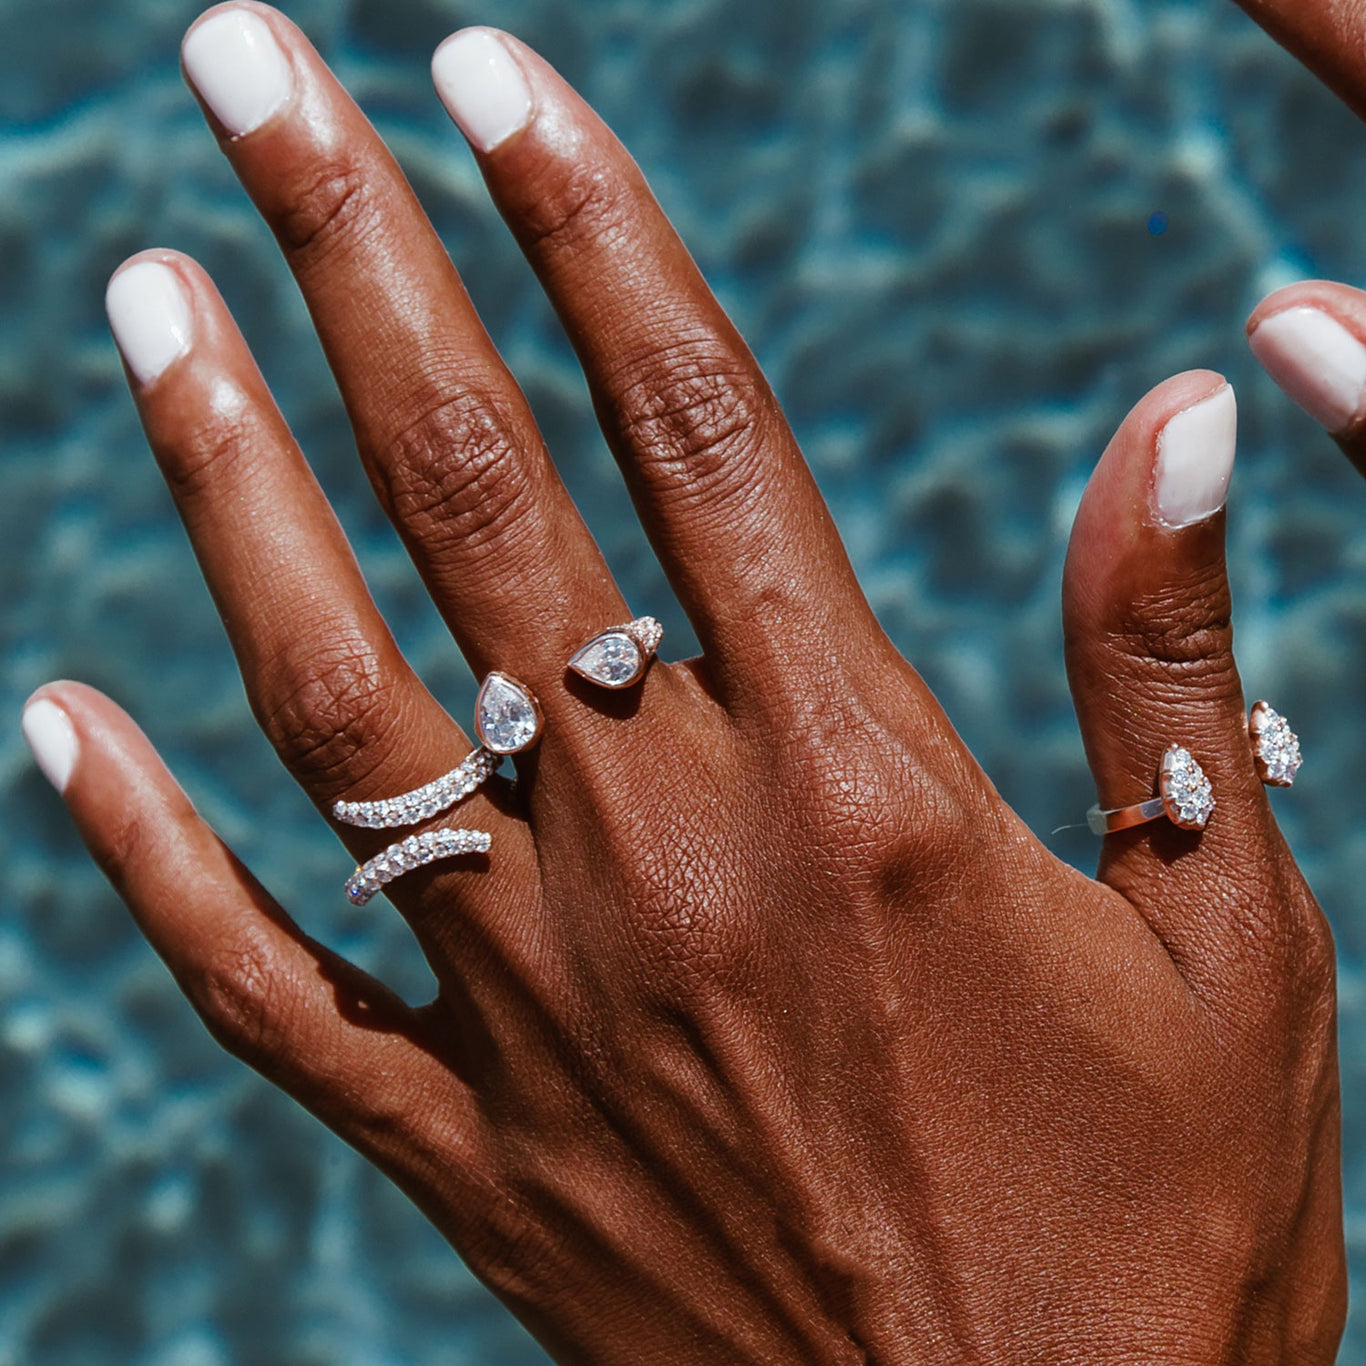 The Medium Twin Ring shown with the Viper Ring and Stella Ring.